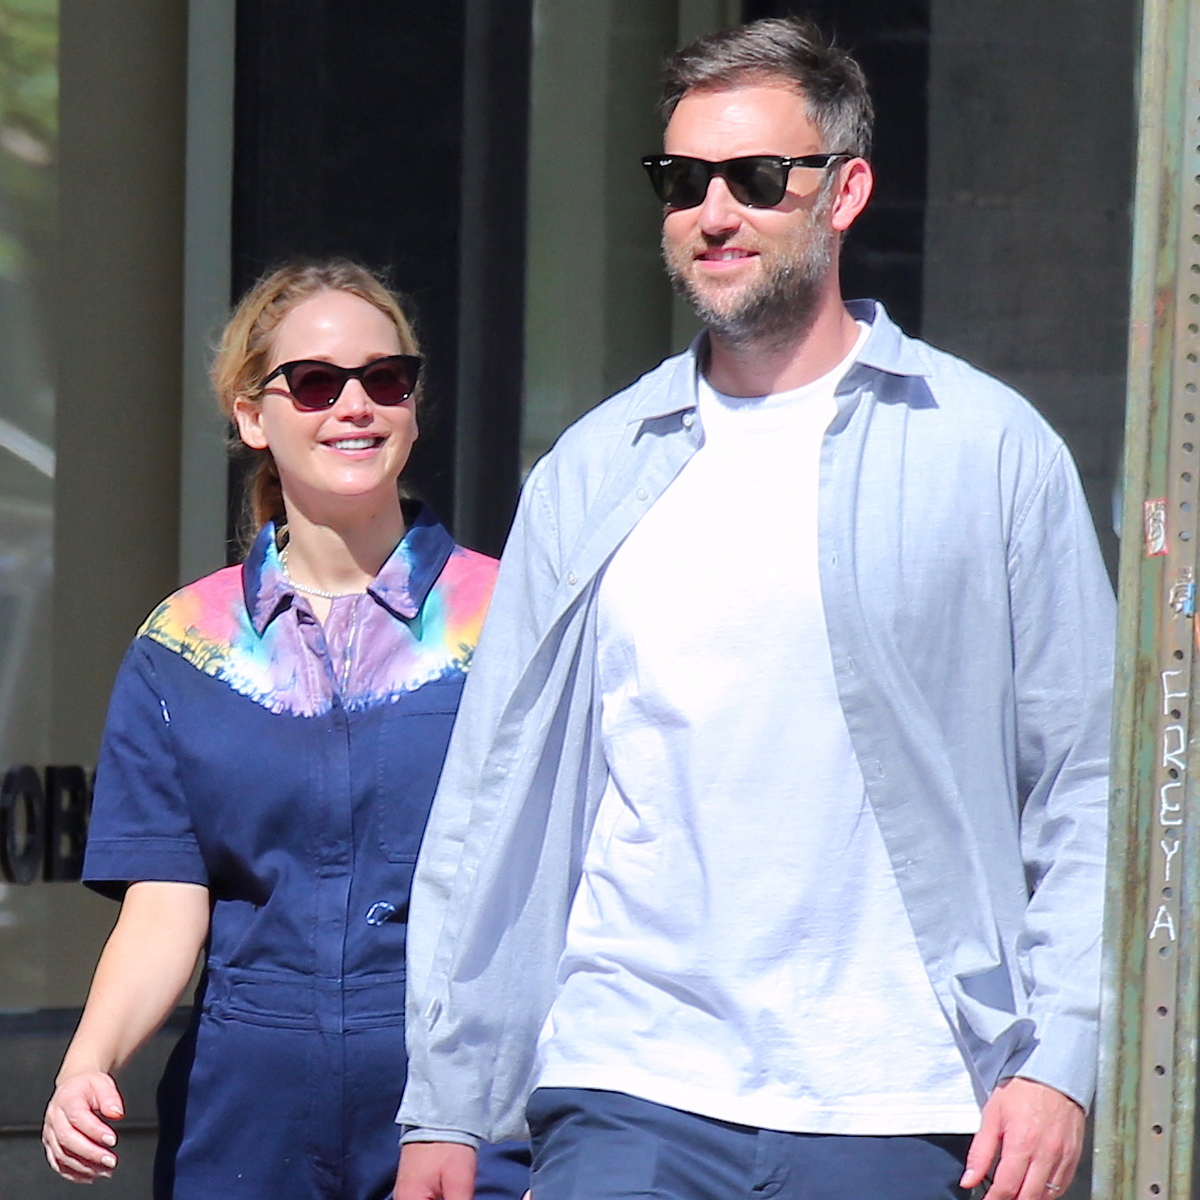 Pregnant Jennifer Lawrence & Cooke Maroney Look in Love During Outing